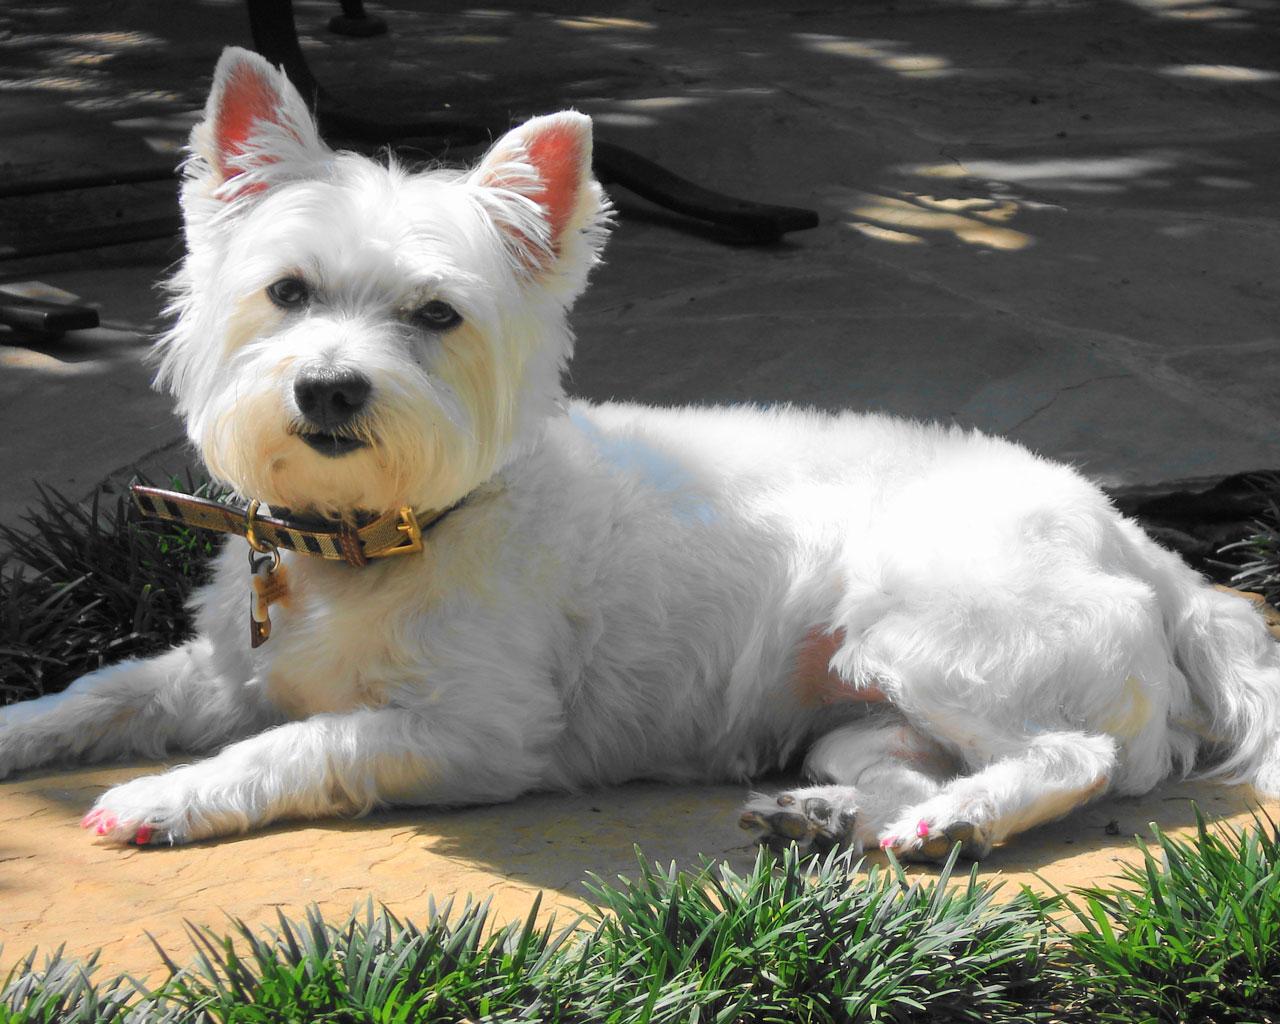 West Highland White Terrier - A Smashing Looking West Highland Terrier Wallpaper #4 1280 x 1024 